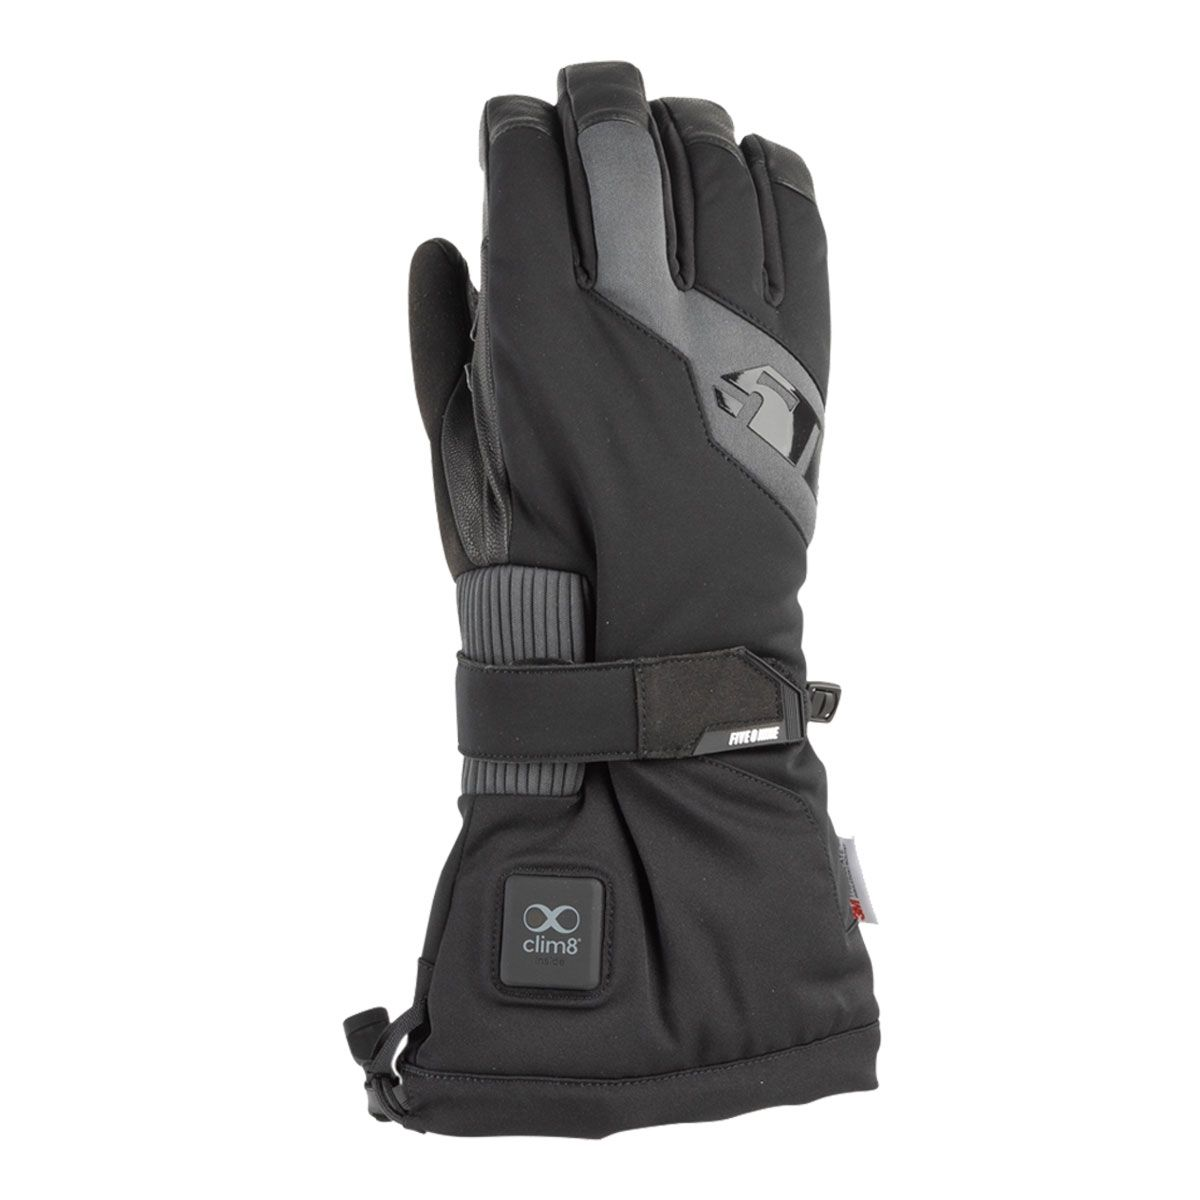 509 gloves adult backcountry ignite